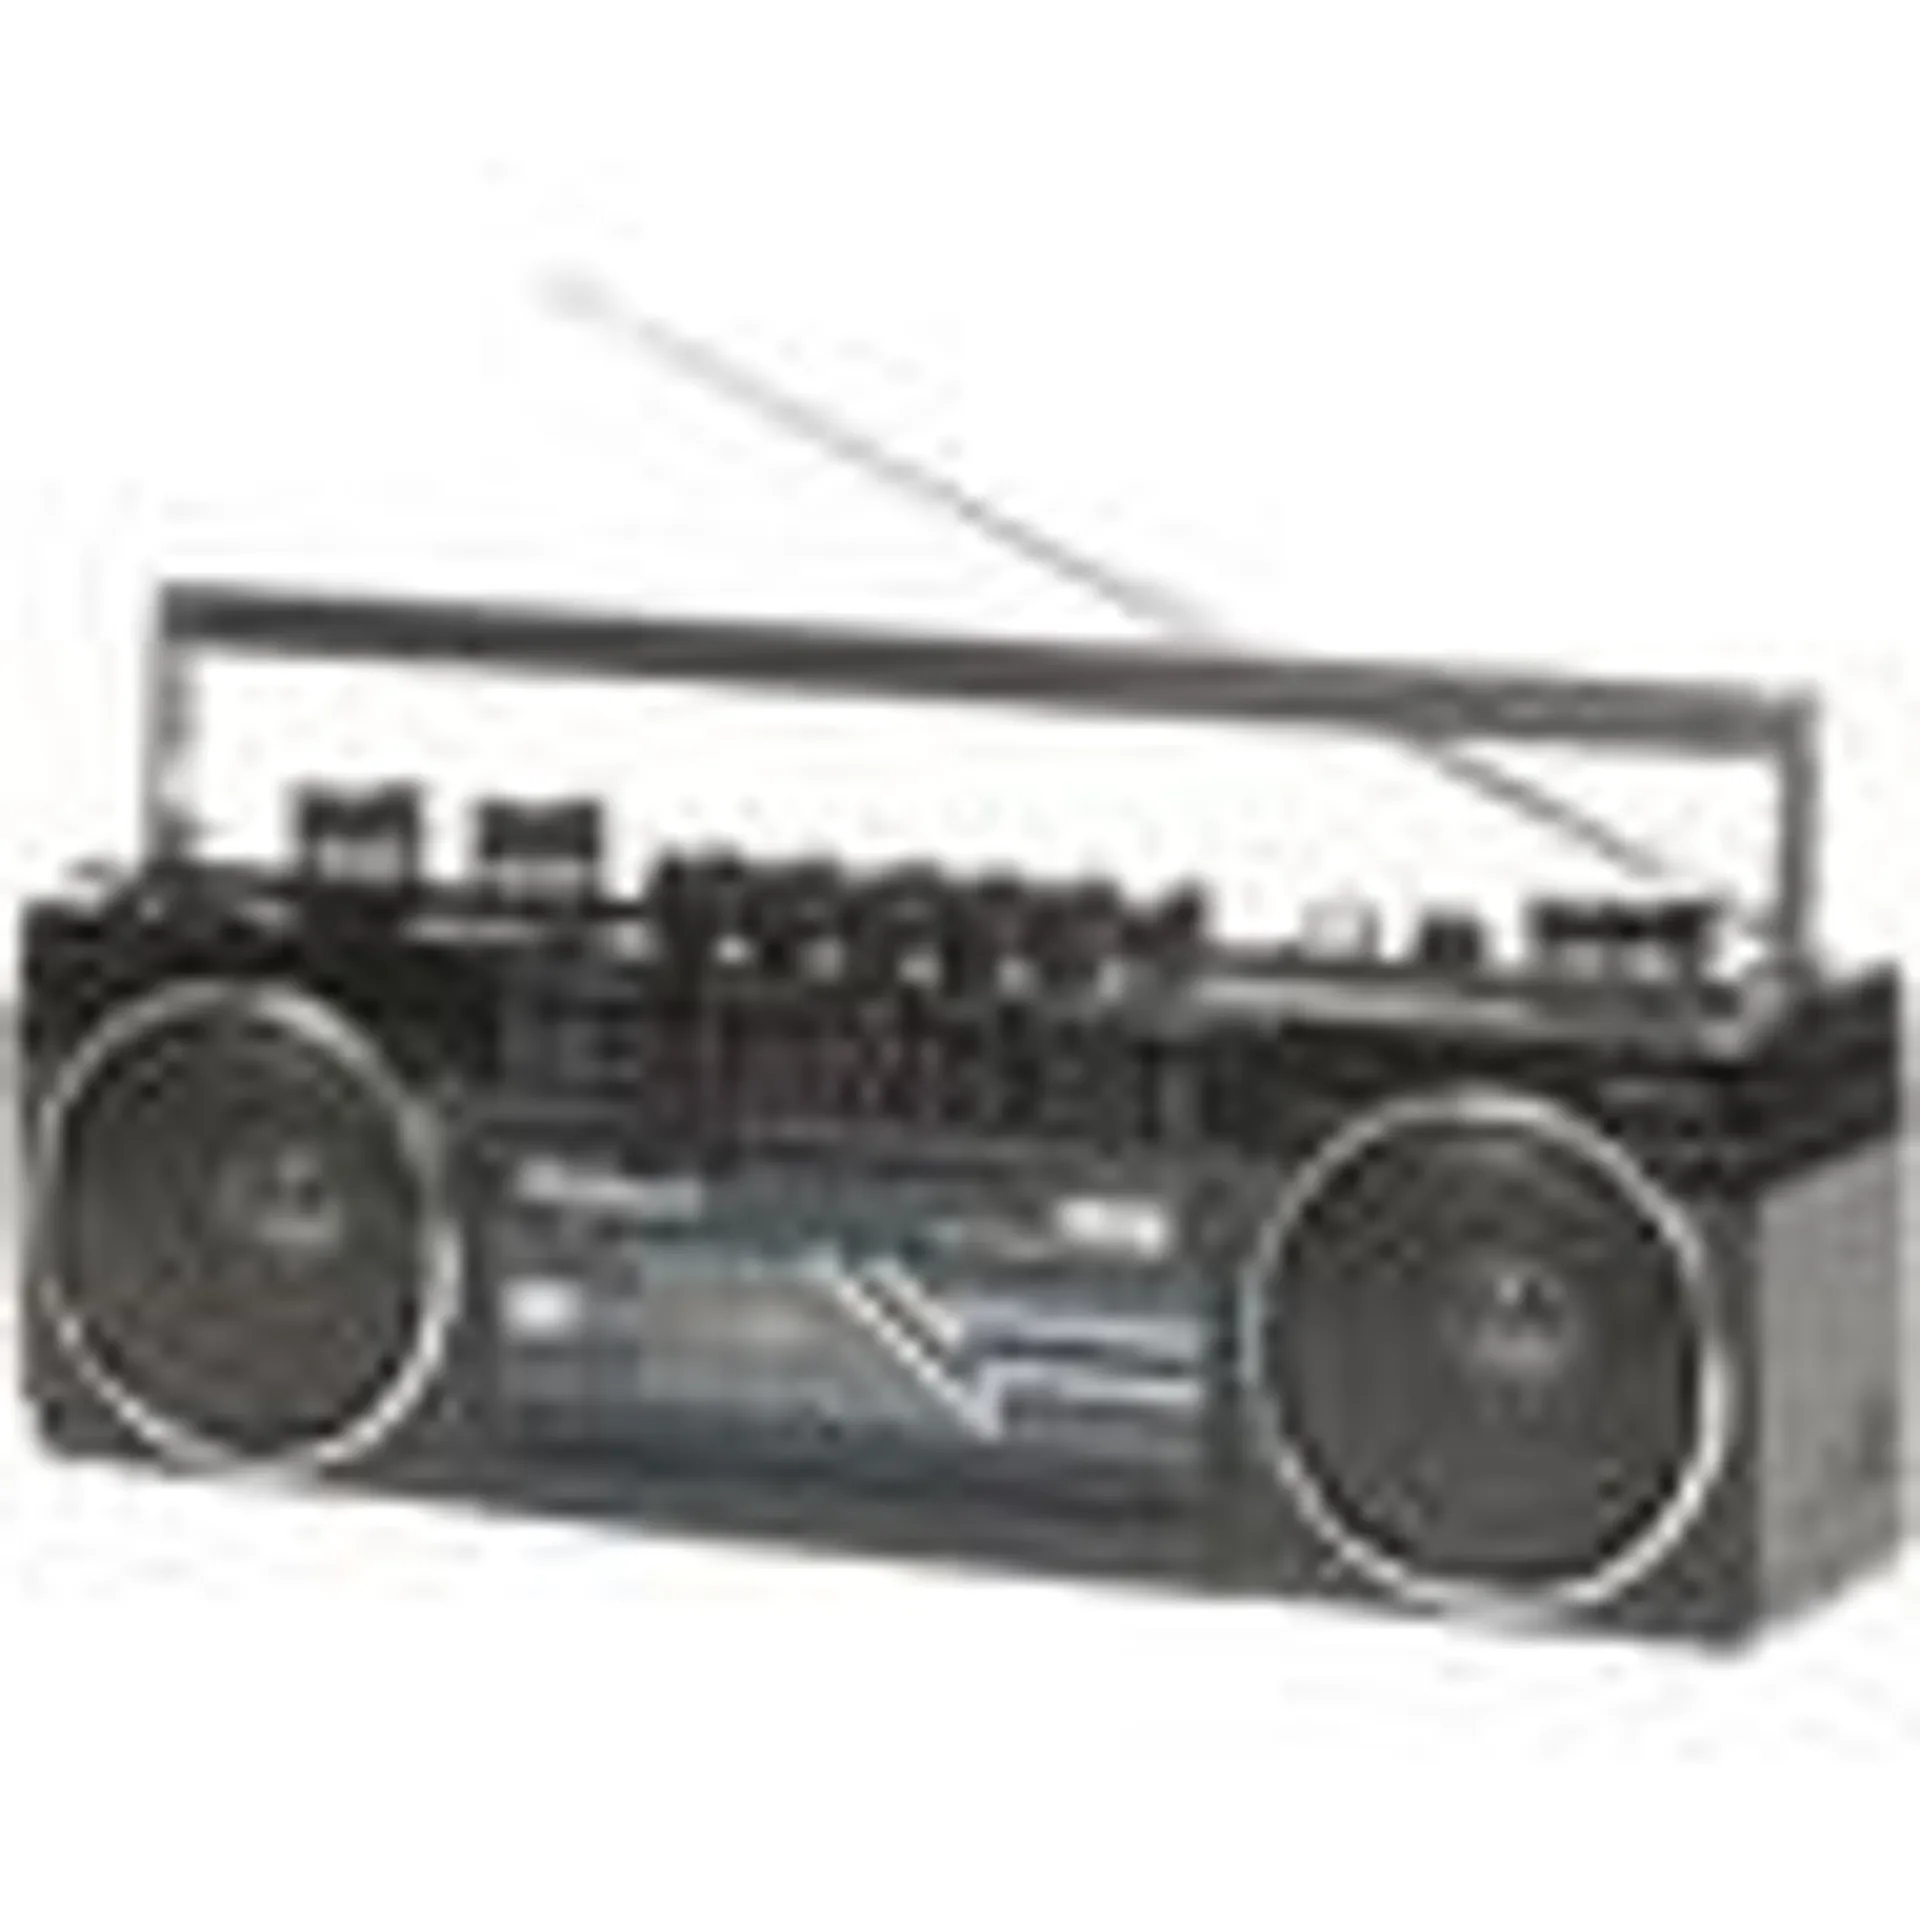 Boom Box with Cassette, Bluetooth® and AM/FM Radio